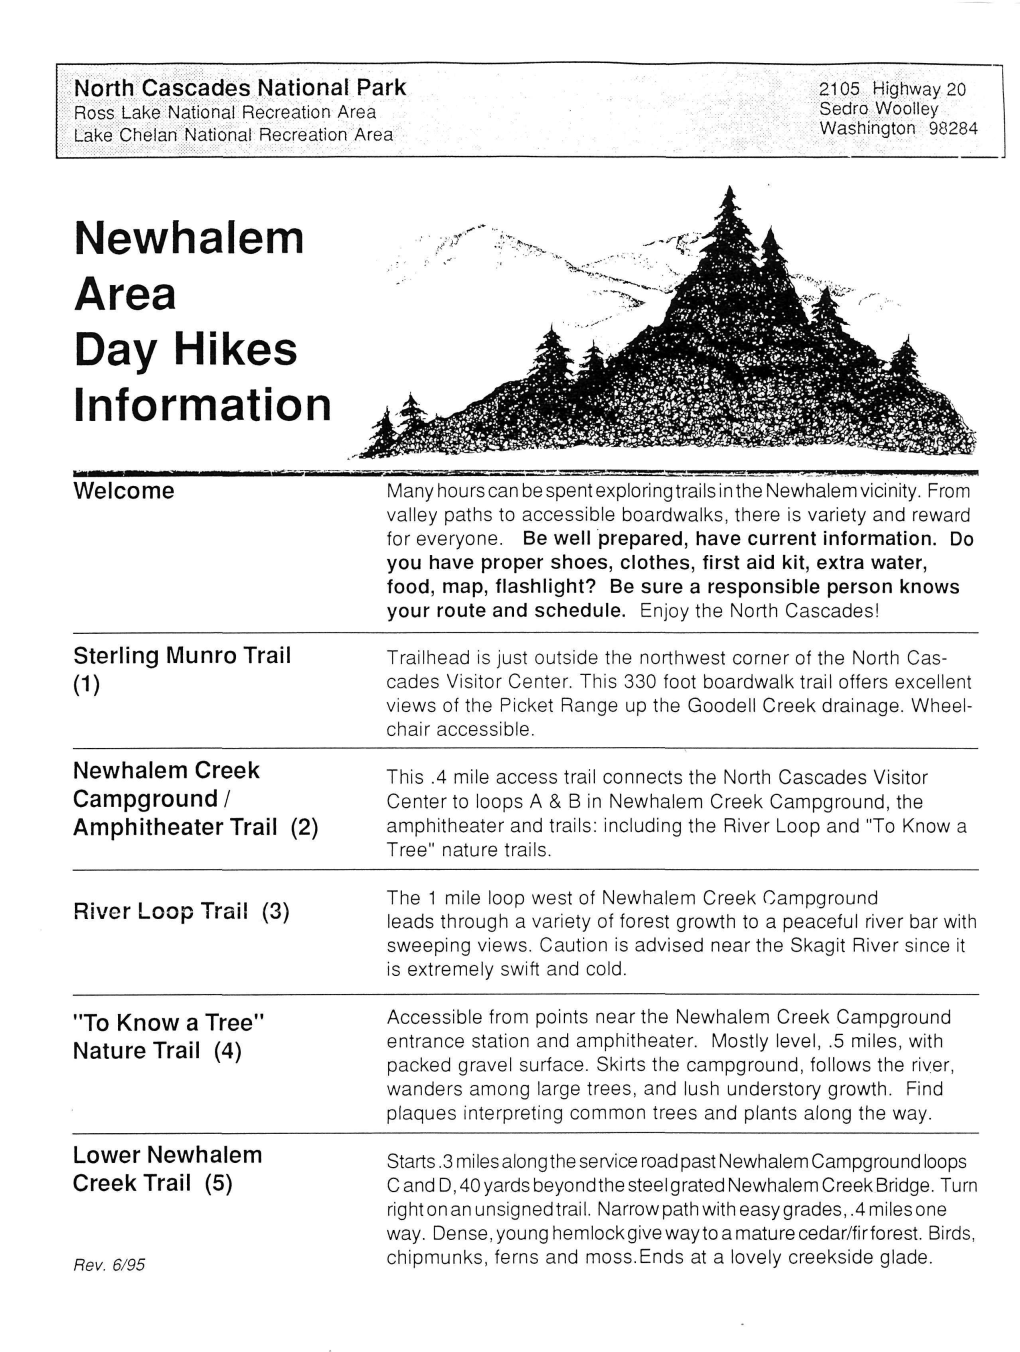 Newhalem Area Day Hikes Information